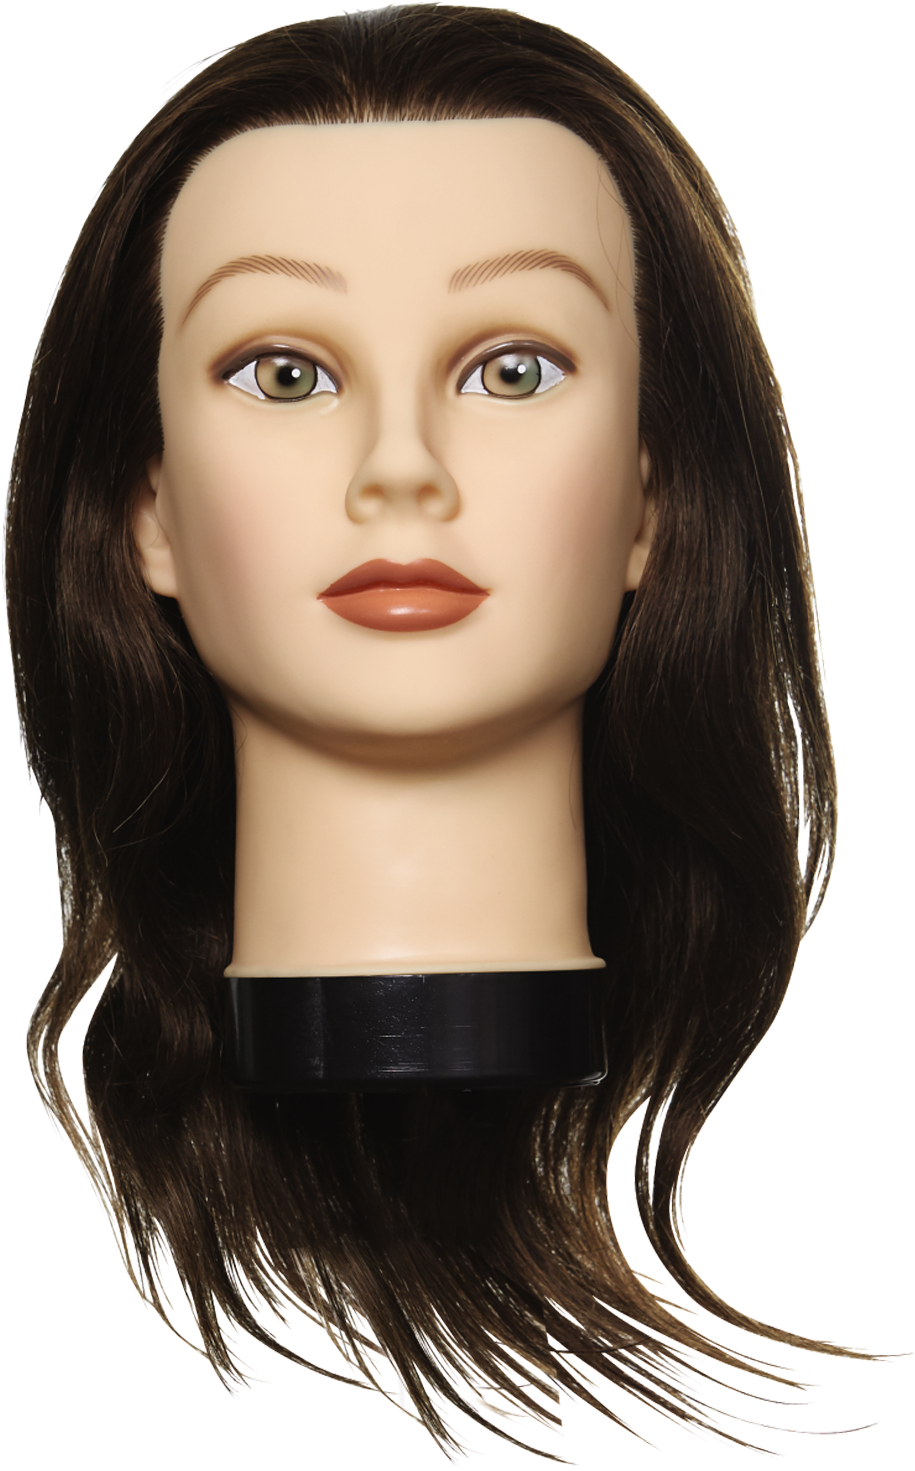 A Mannequin Head With Brown Hair